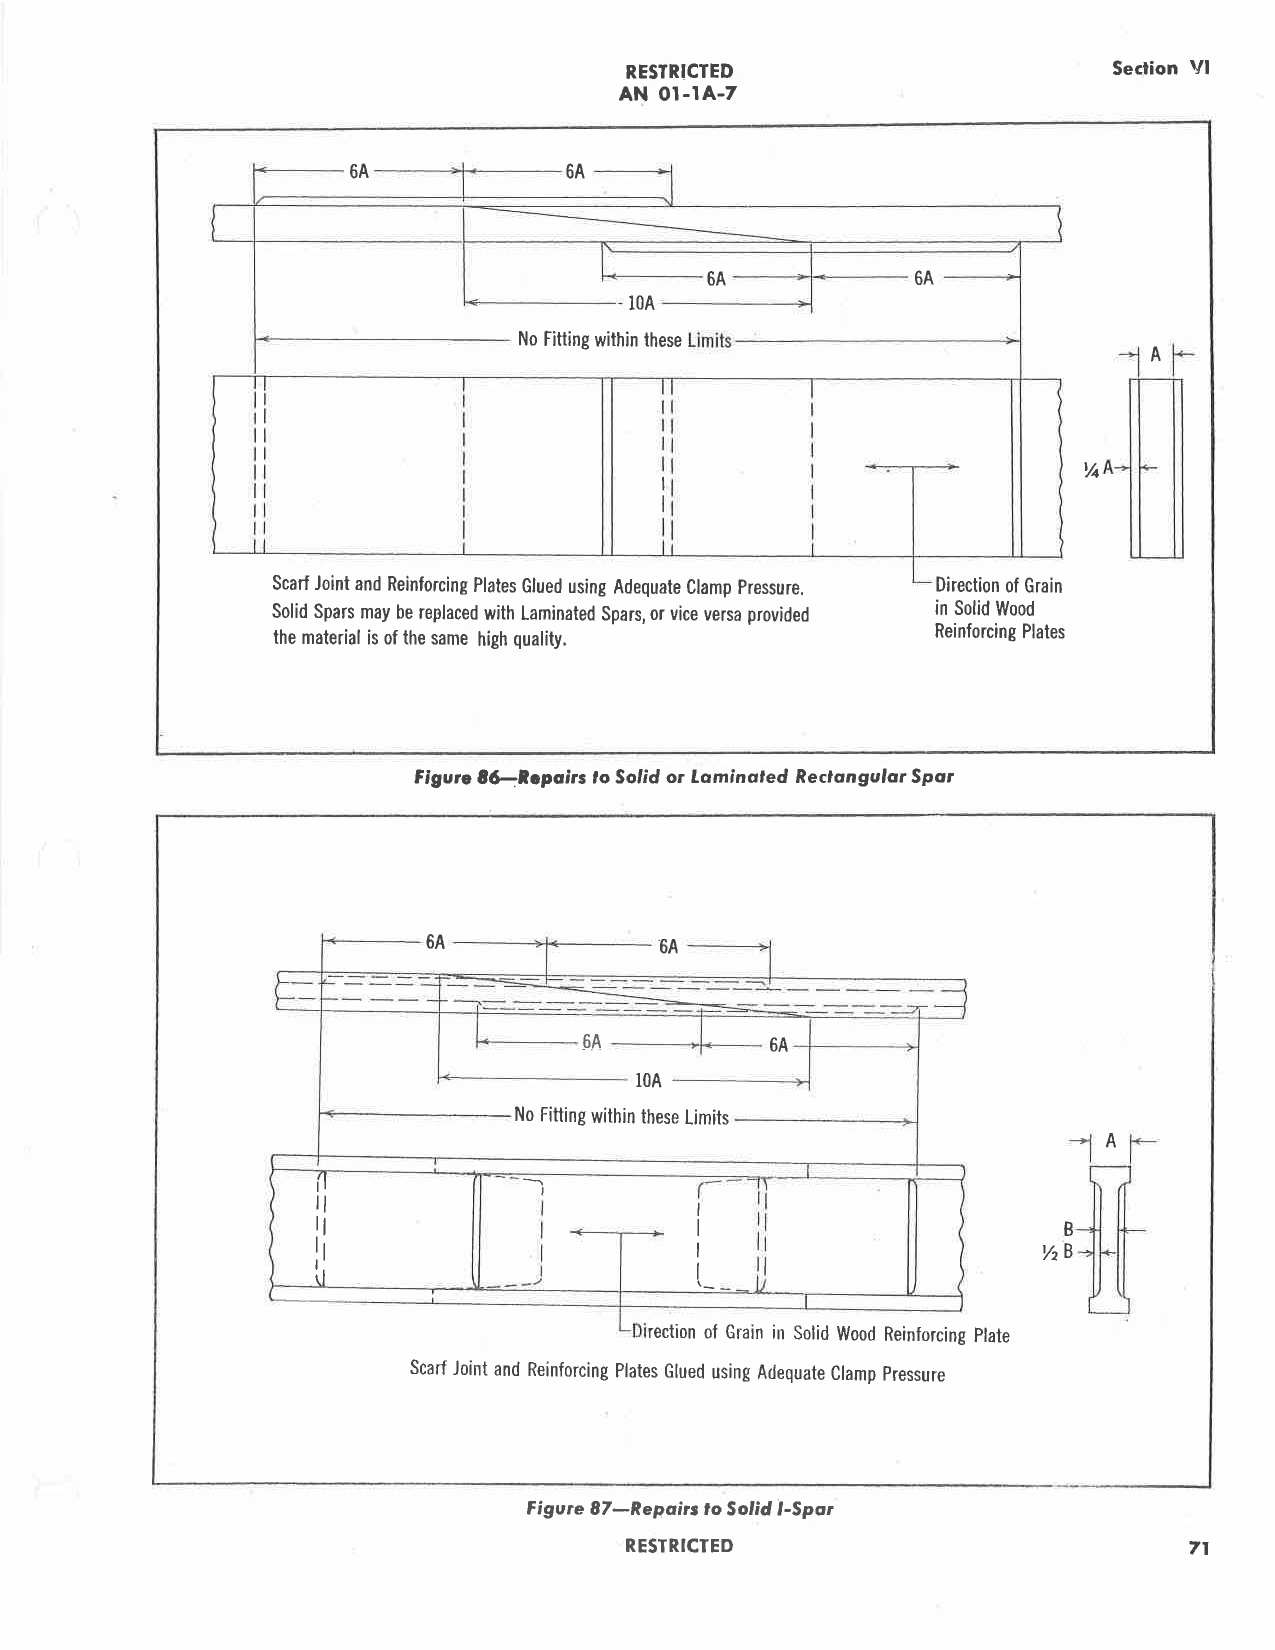 Sample page 77 from AirCorps Library document: Repair of Wood Aircraft Structures - Engineering Handbook